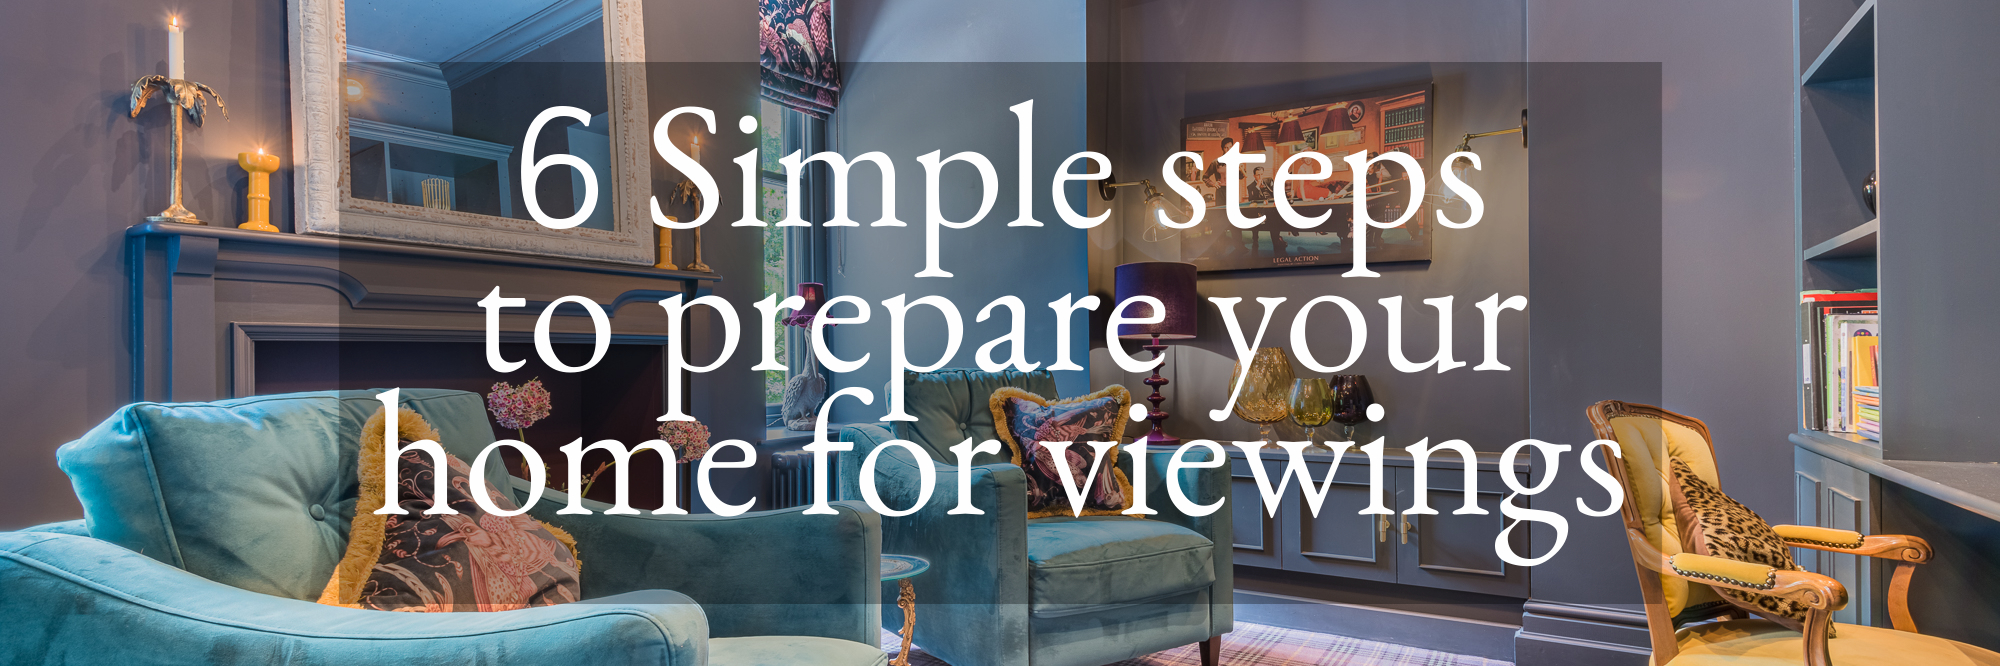 linkedin-article-header-6-simple-steps-to-prepare-your-home-for-viewings